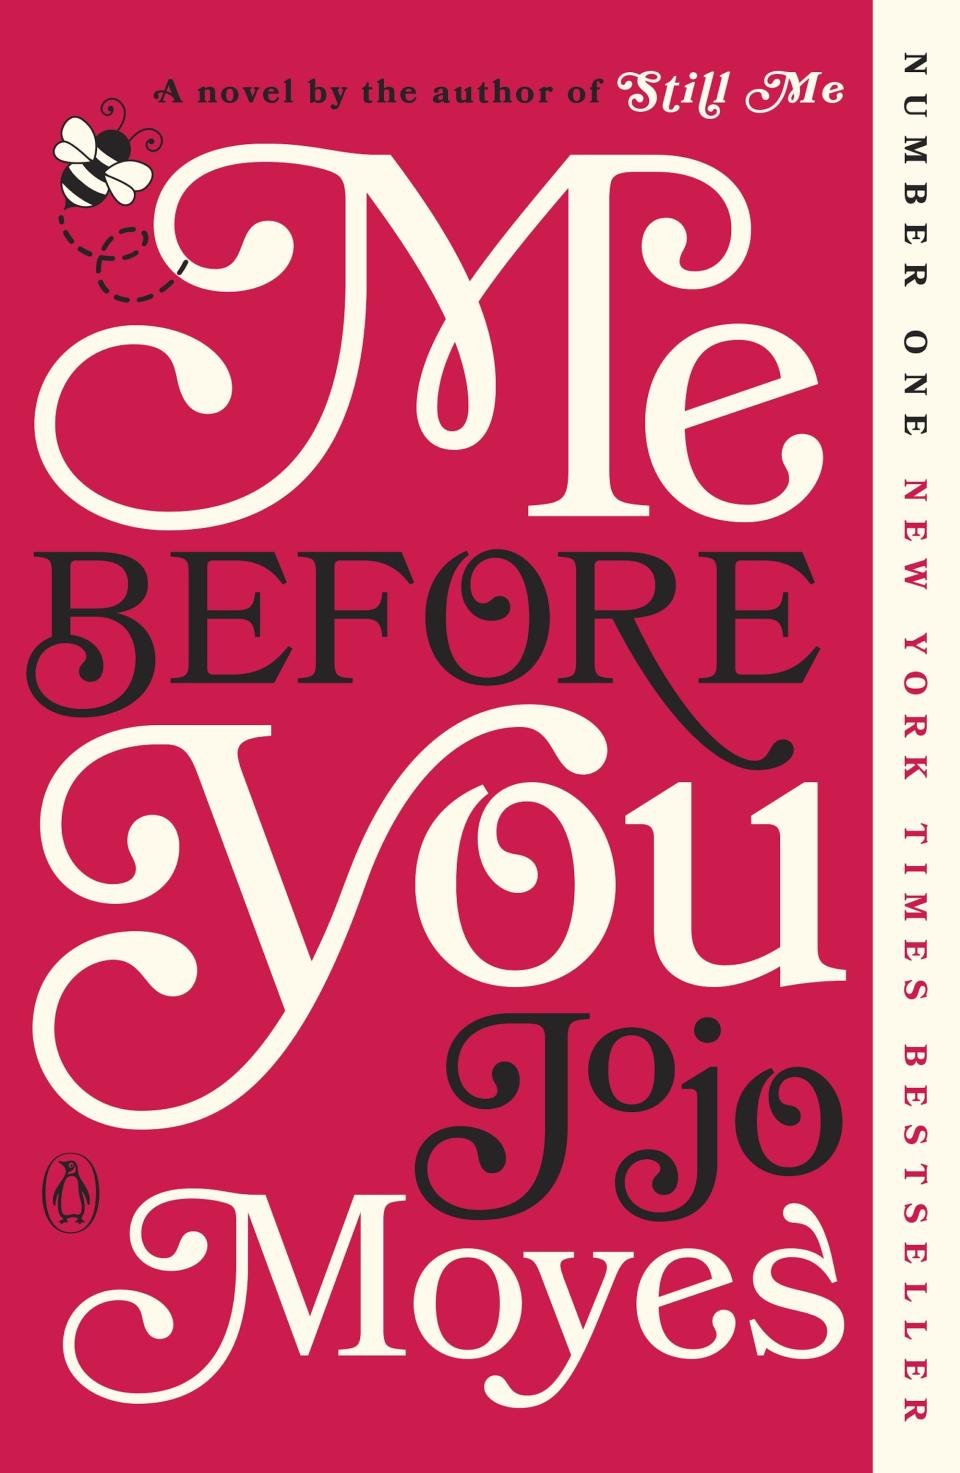 The book cover of "Me Before You" by Jojo Moyes.